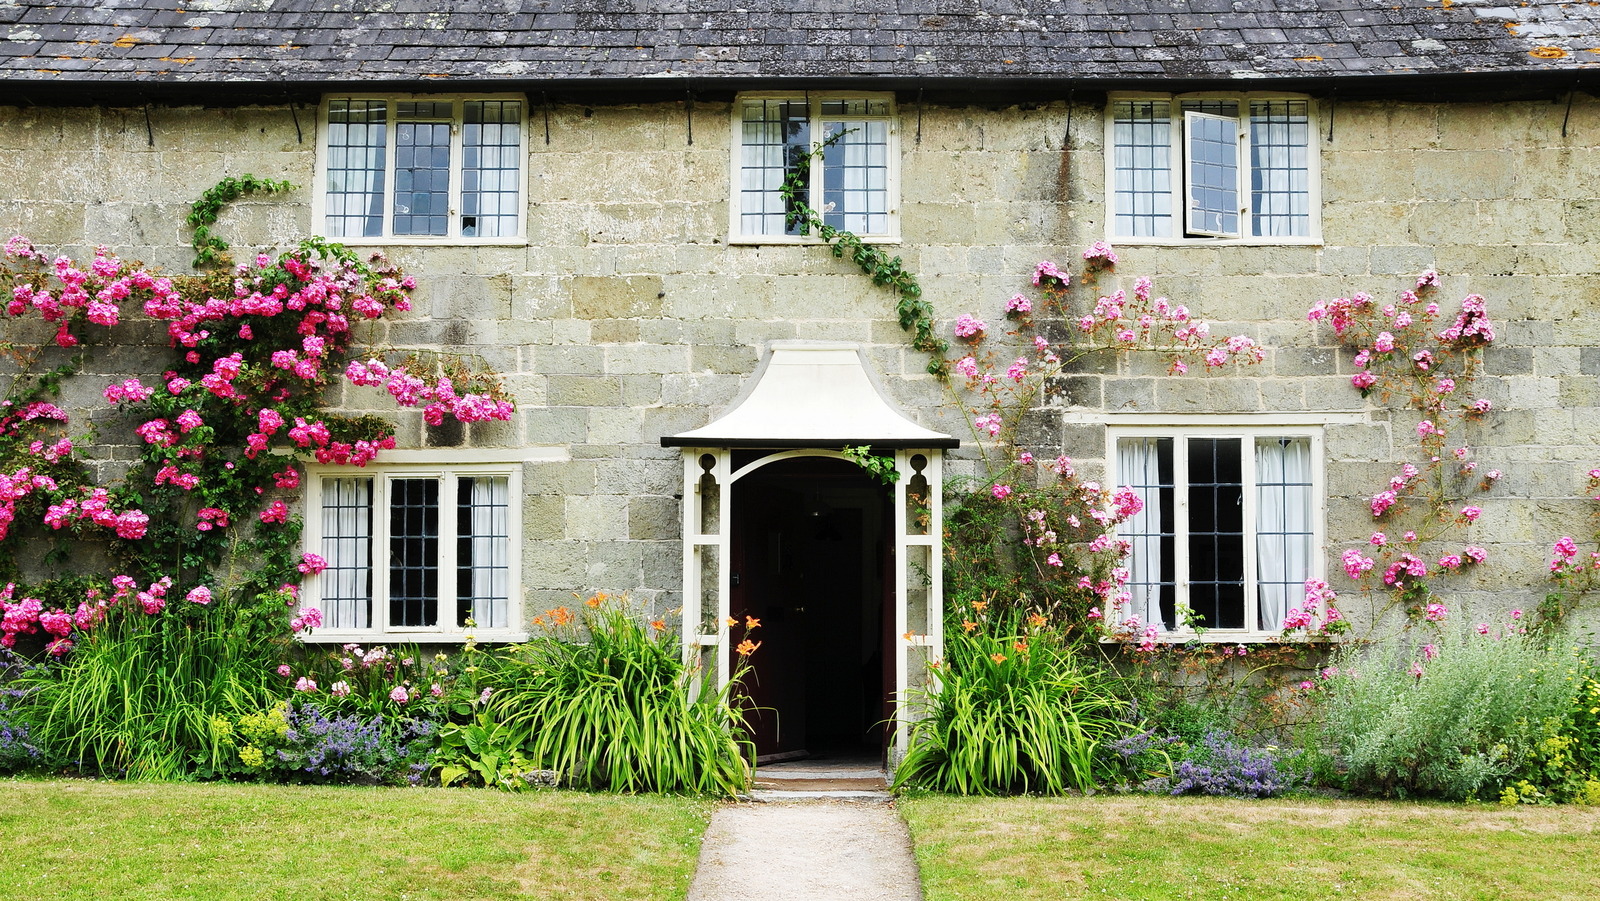 English Cottage Architecture: History and 8 Common Styles